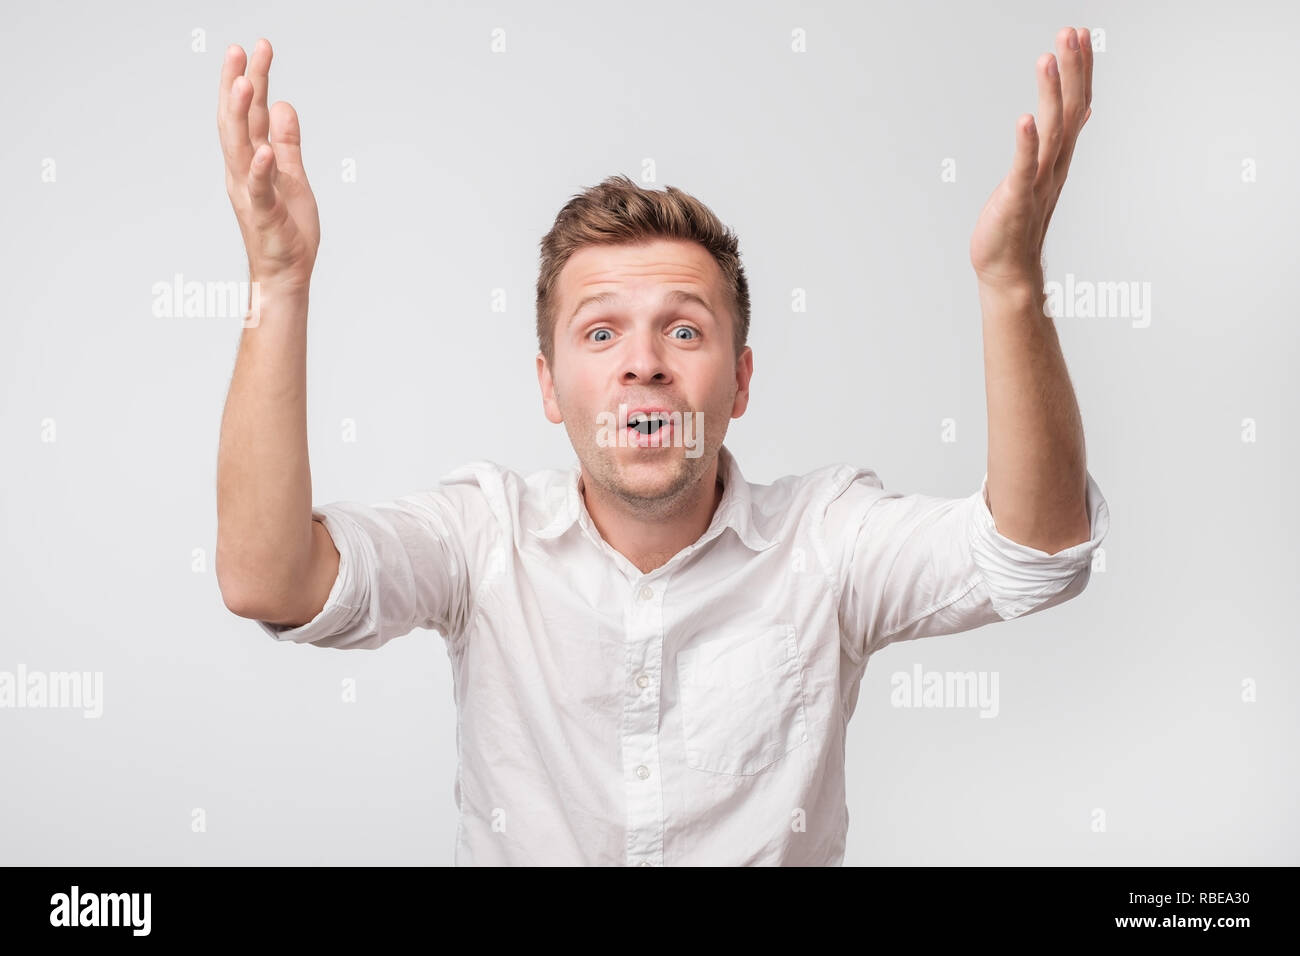 Glad man looks with surprise and amazement face, raising hands up. Stock Photo